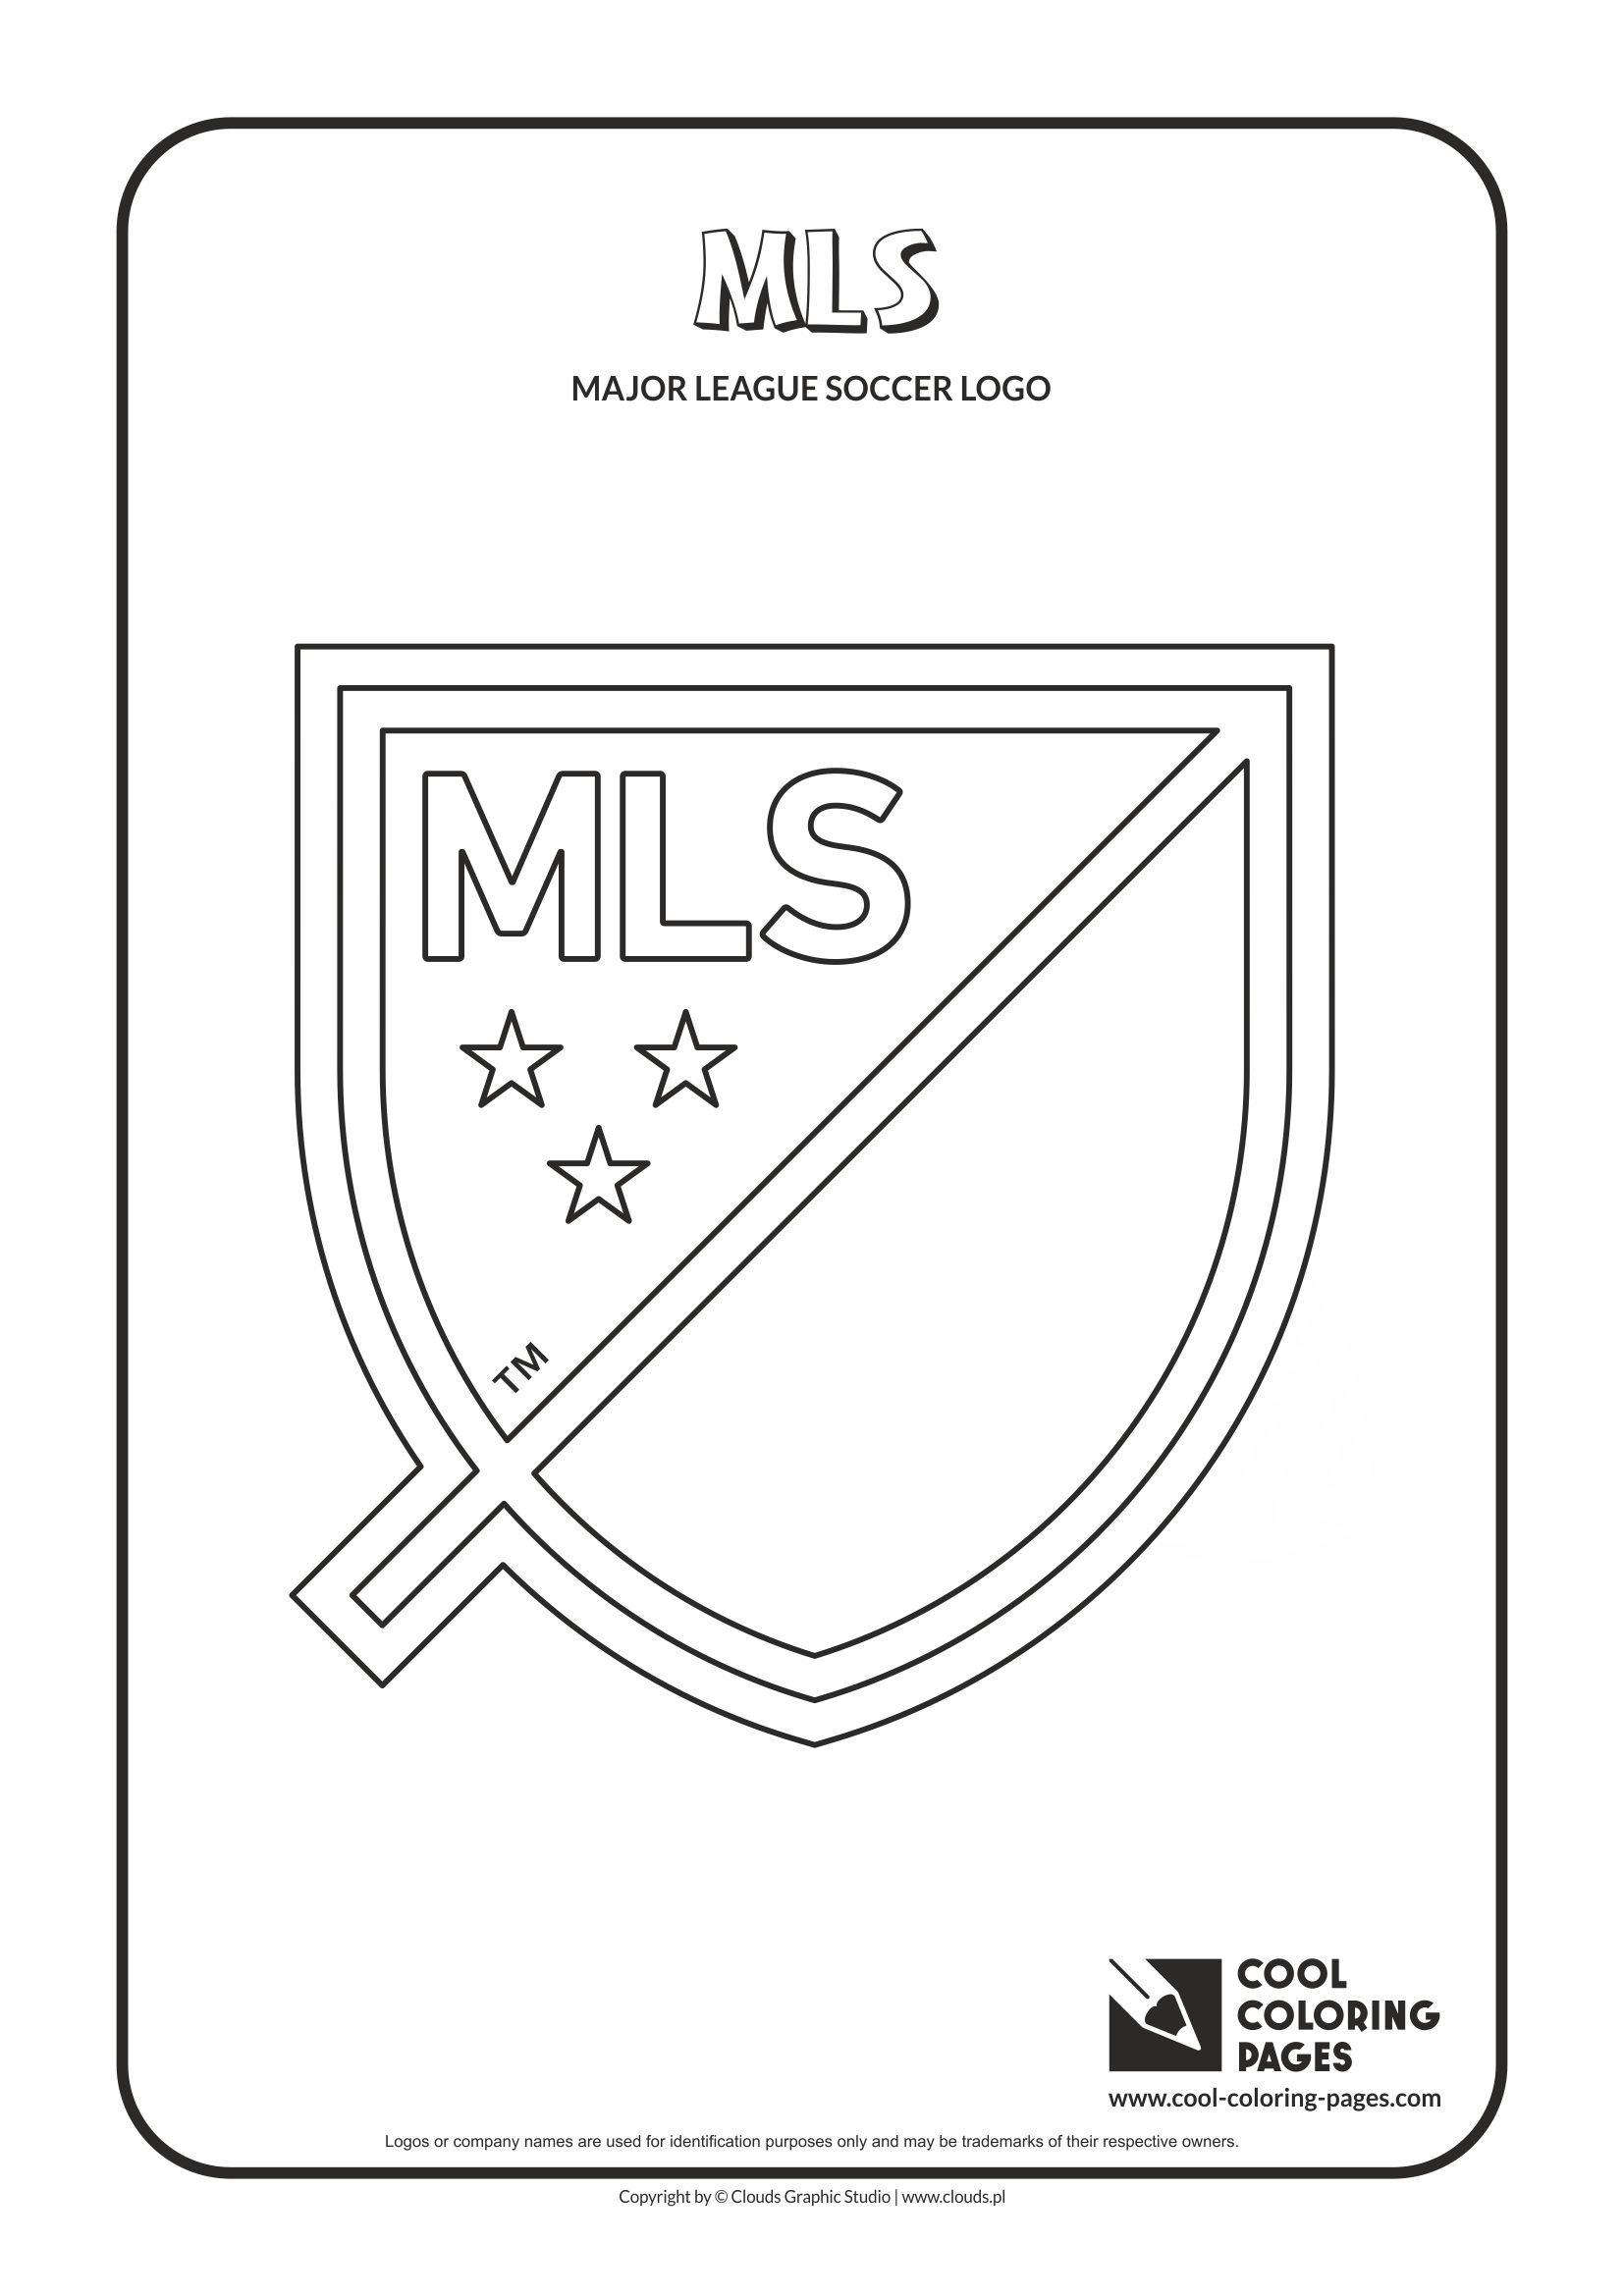 MLS logo coloring pages - Cool Coloring Pages